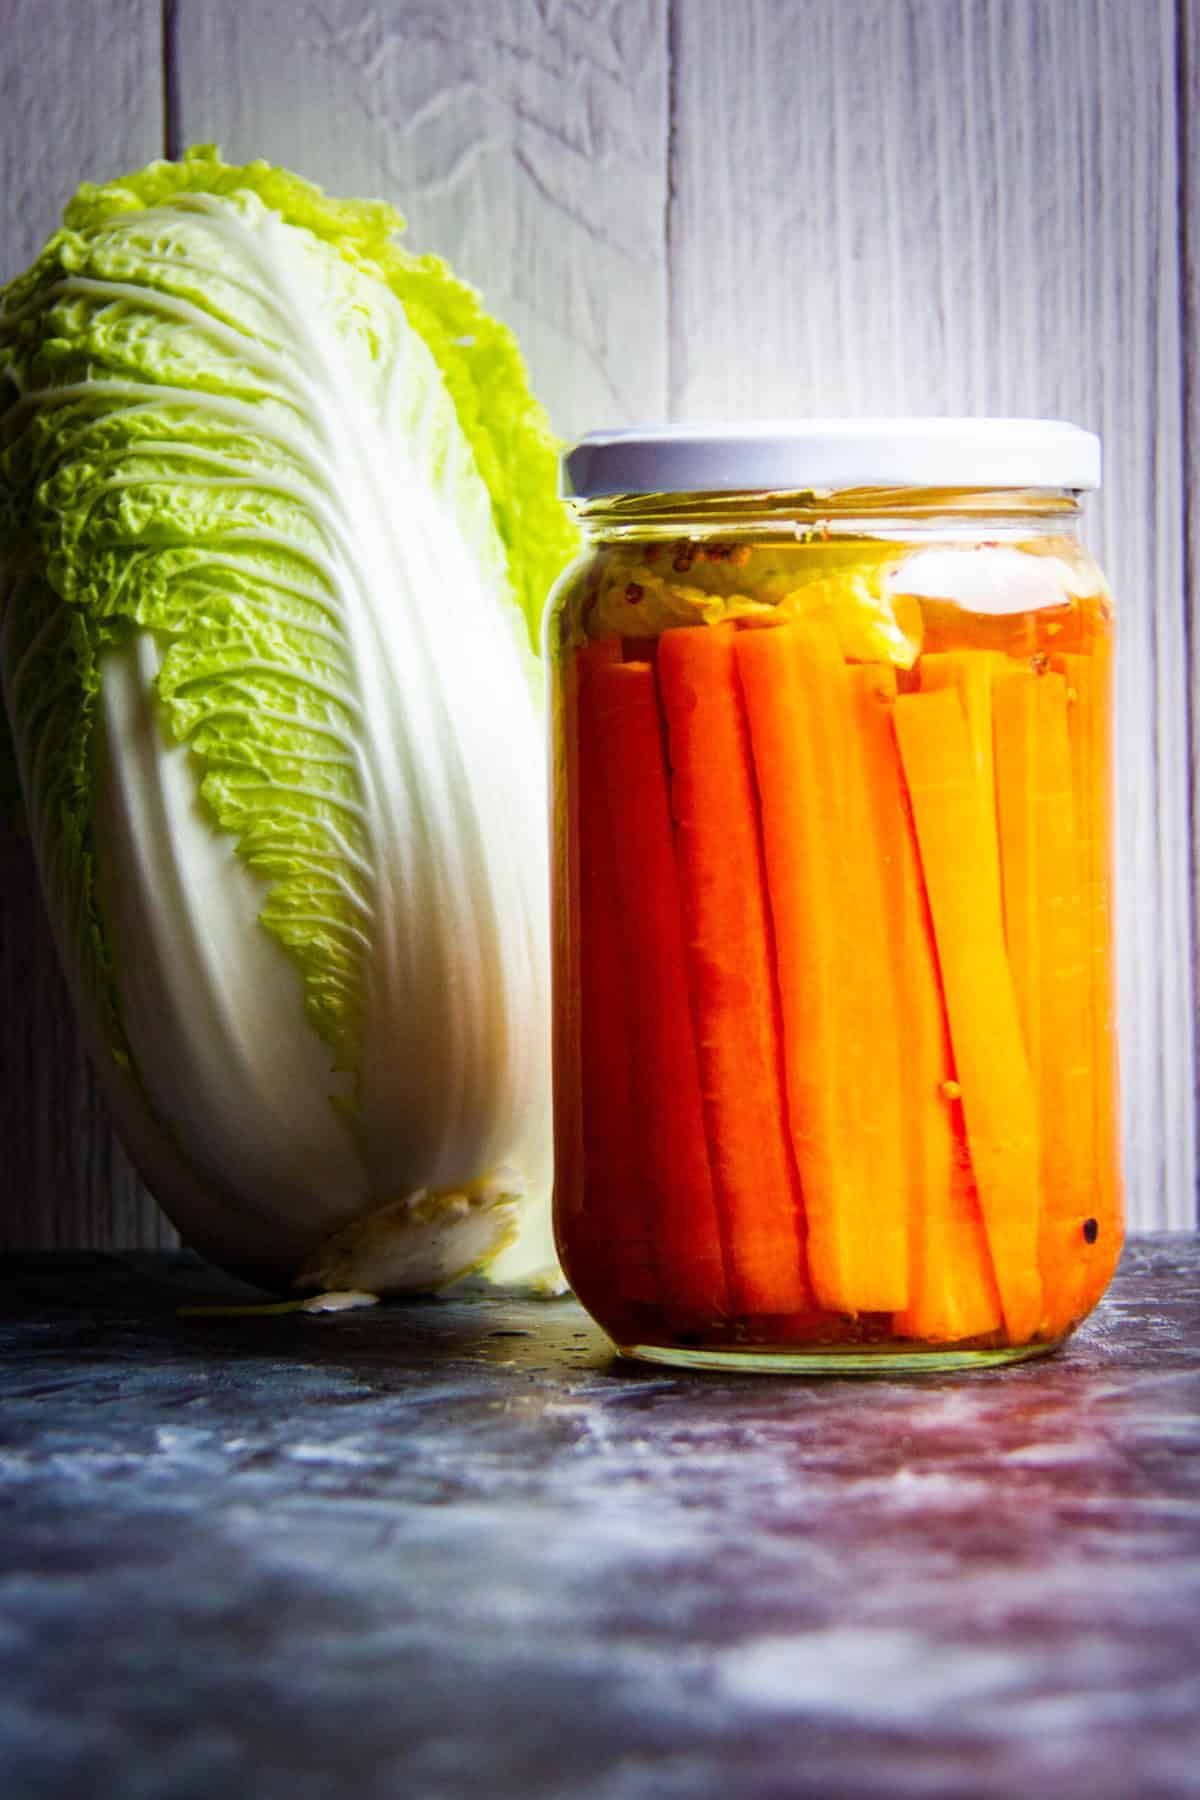 Fermented Carrots with cabbage and raw carrots on the side.